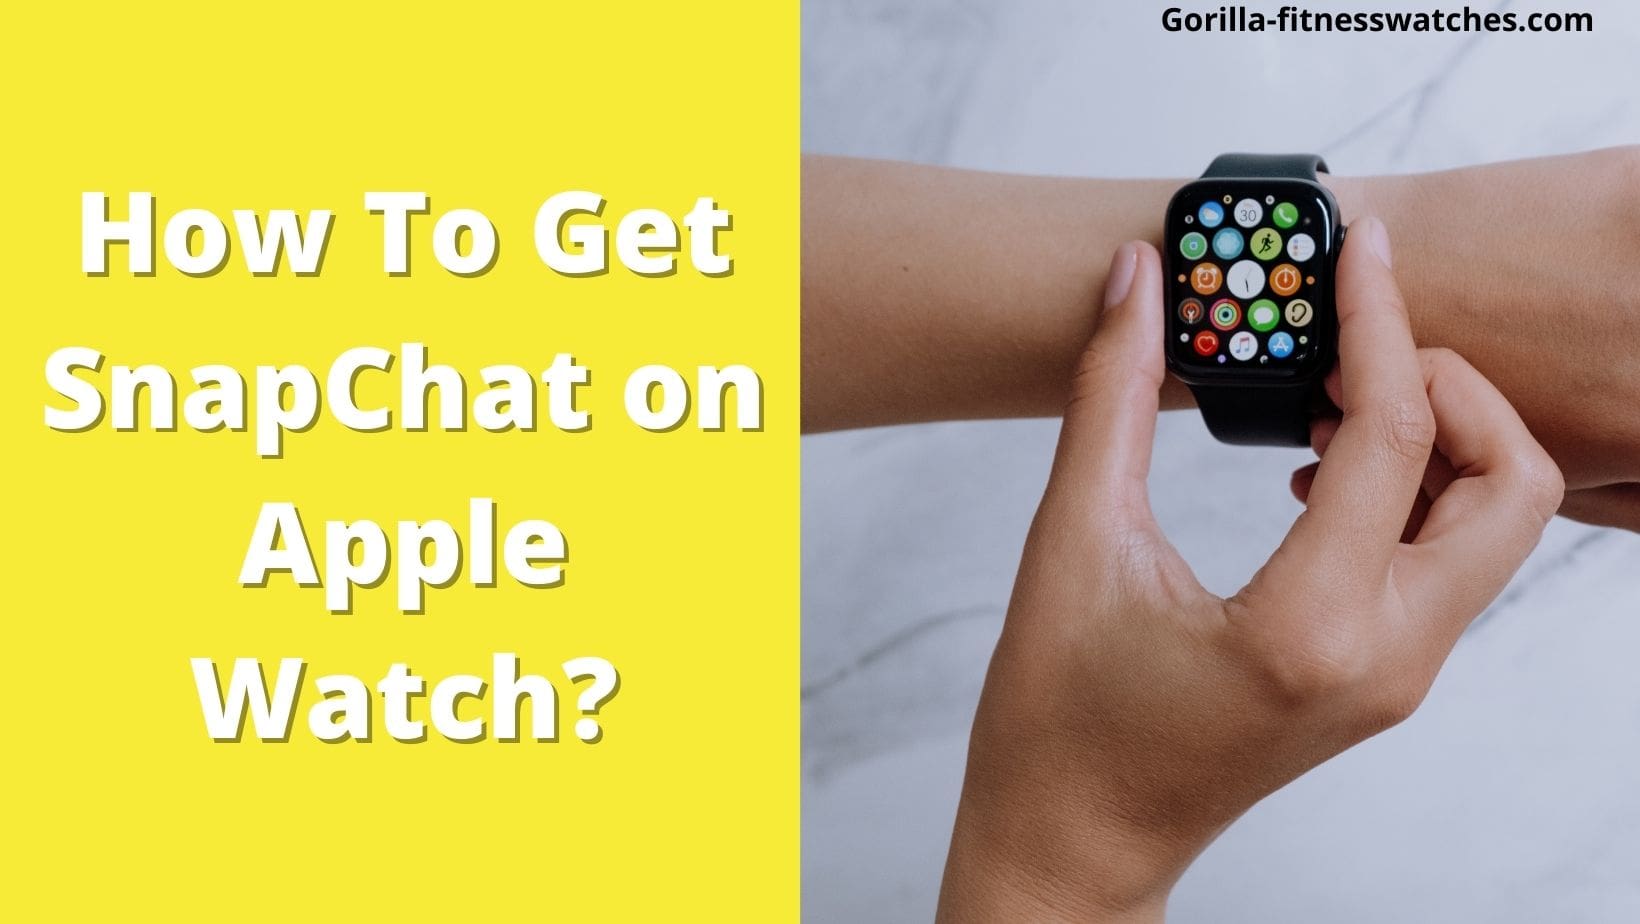 How To Get SnapChat on Apple Watch